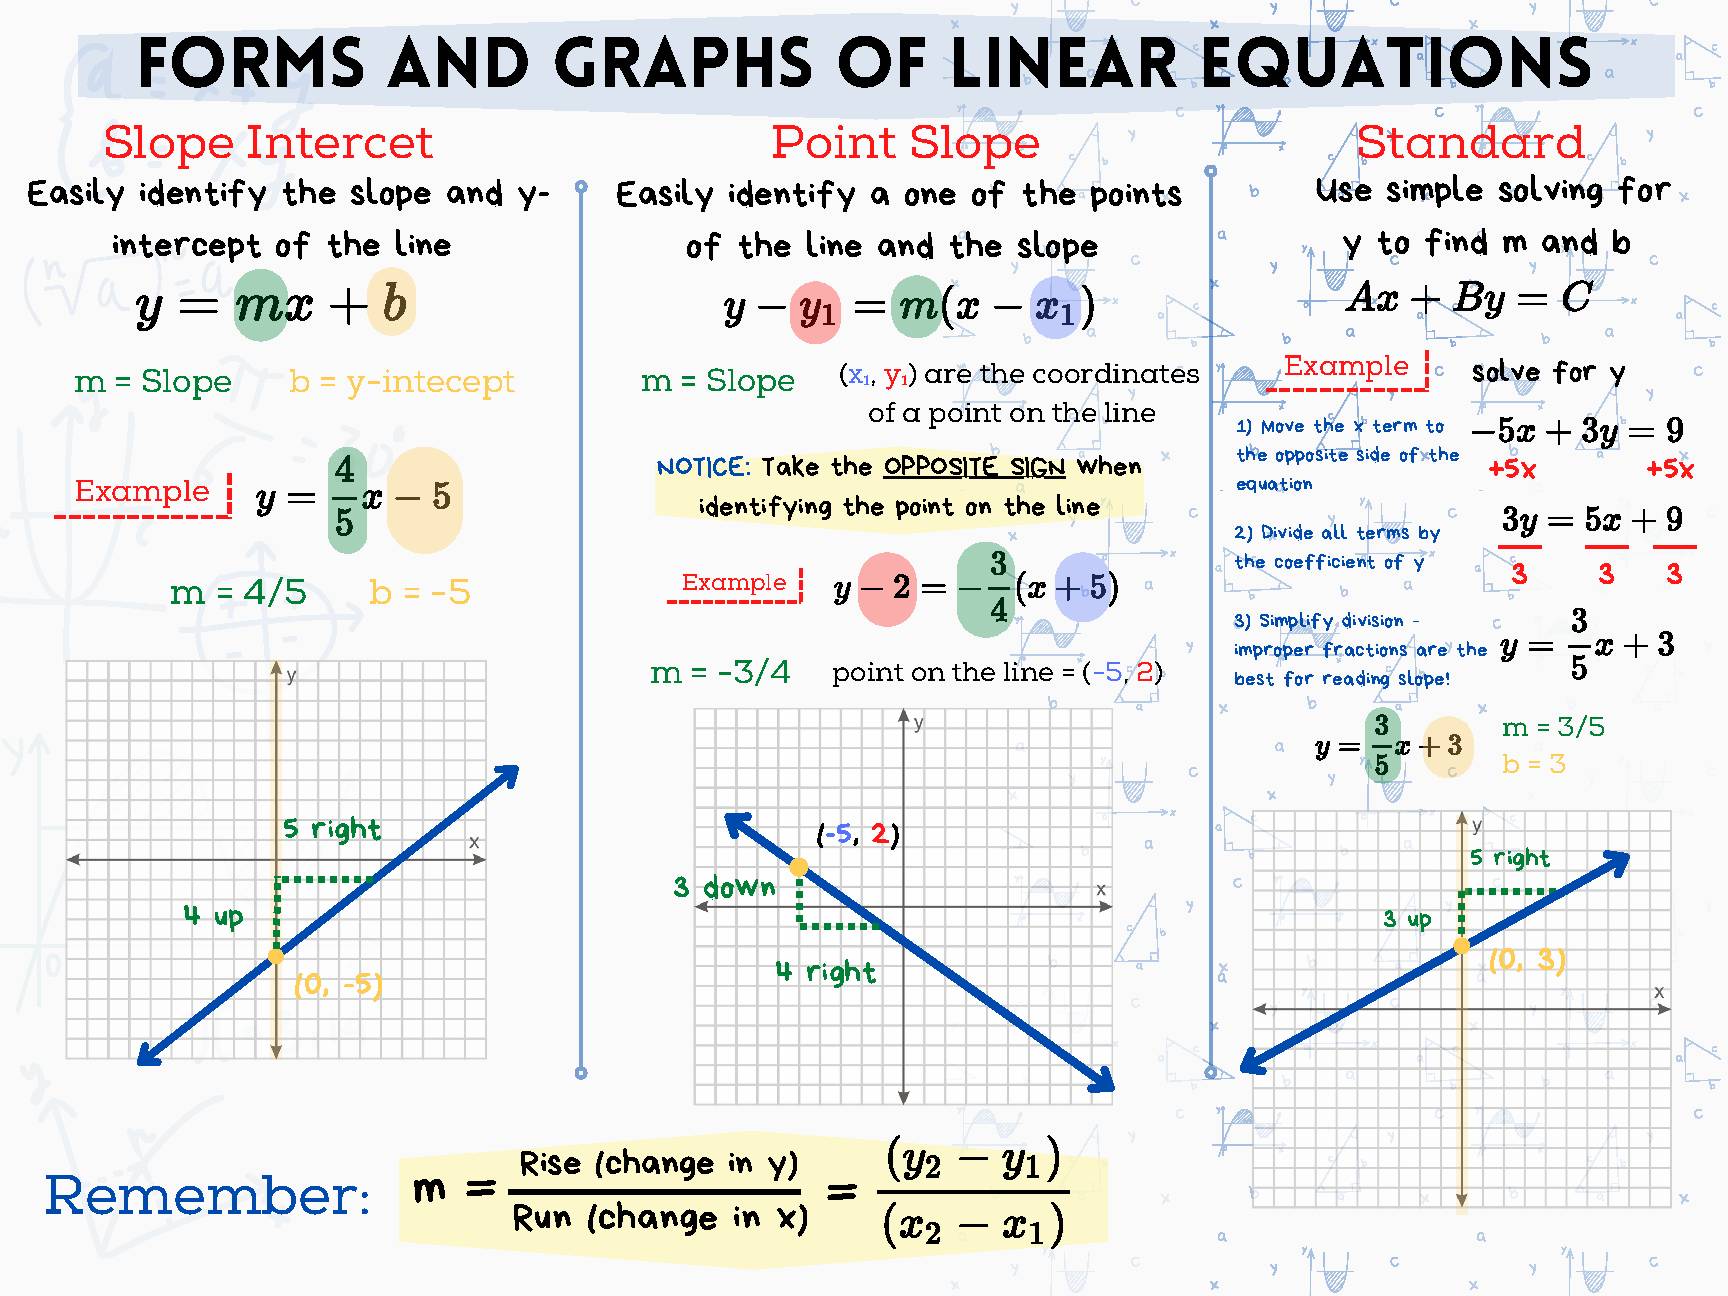 Forms of Linear Equations Classroom Poster